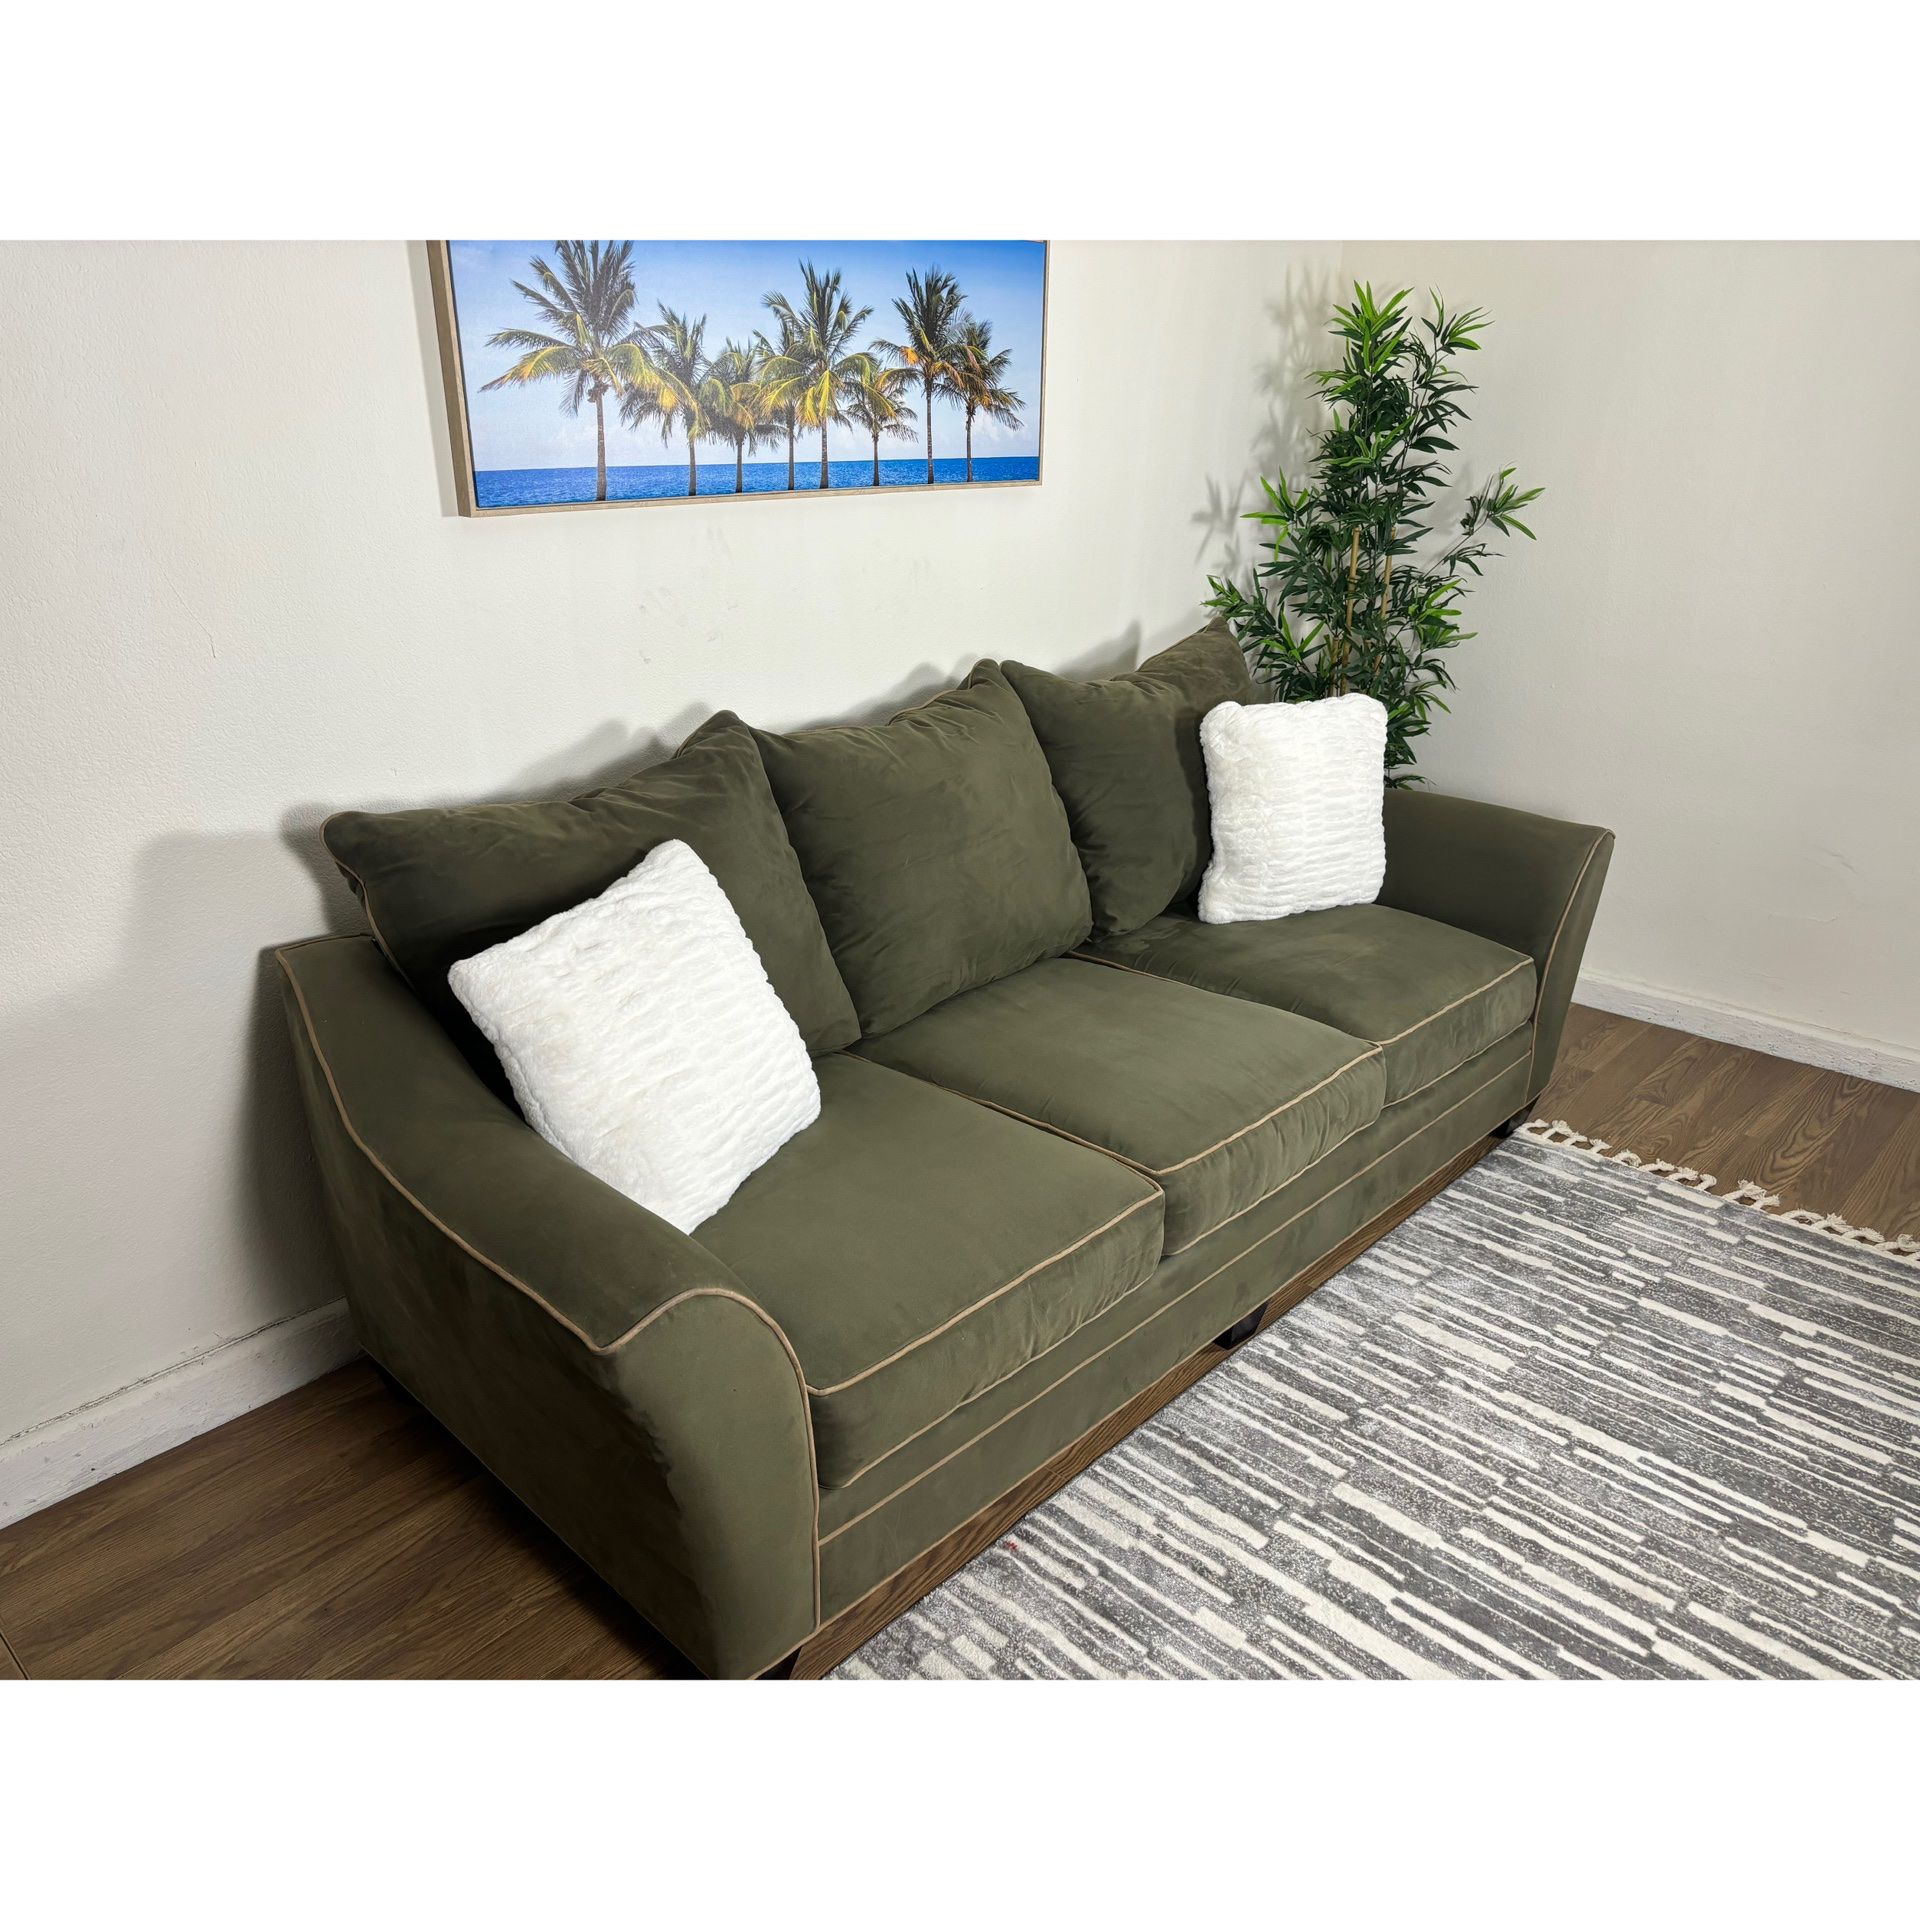 Beautiful Olive Green Couch - Free Delivery